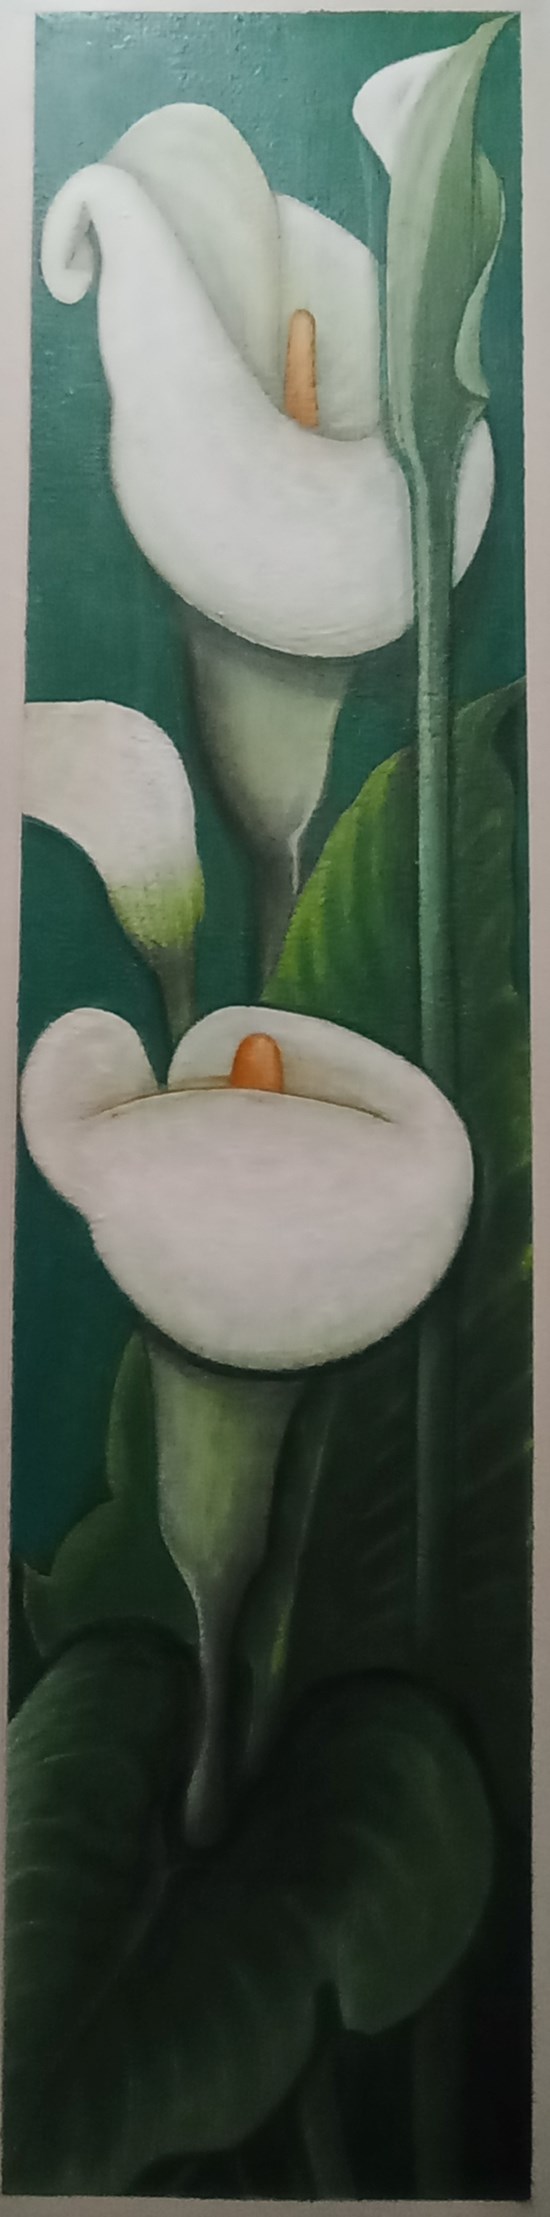 Calla plant, painting by Khaled Hamdy .H